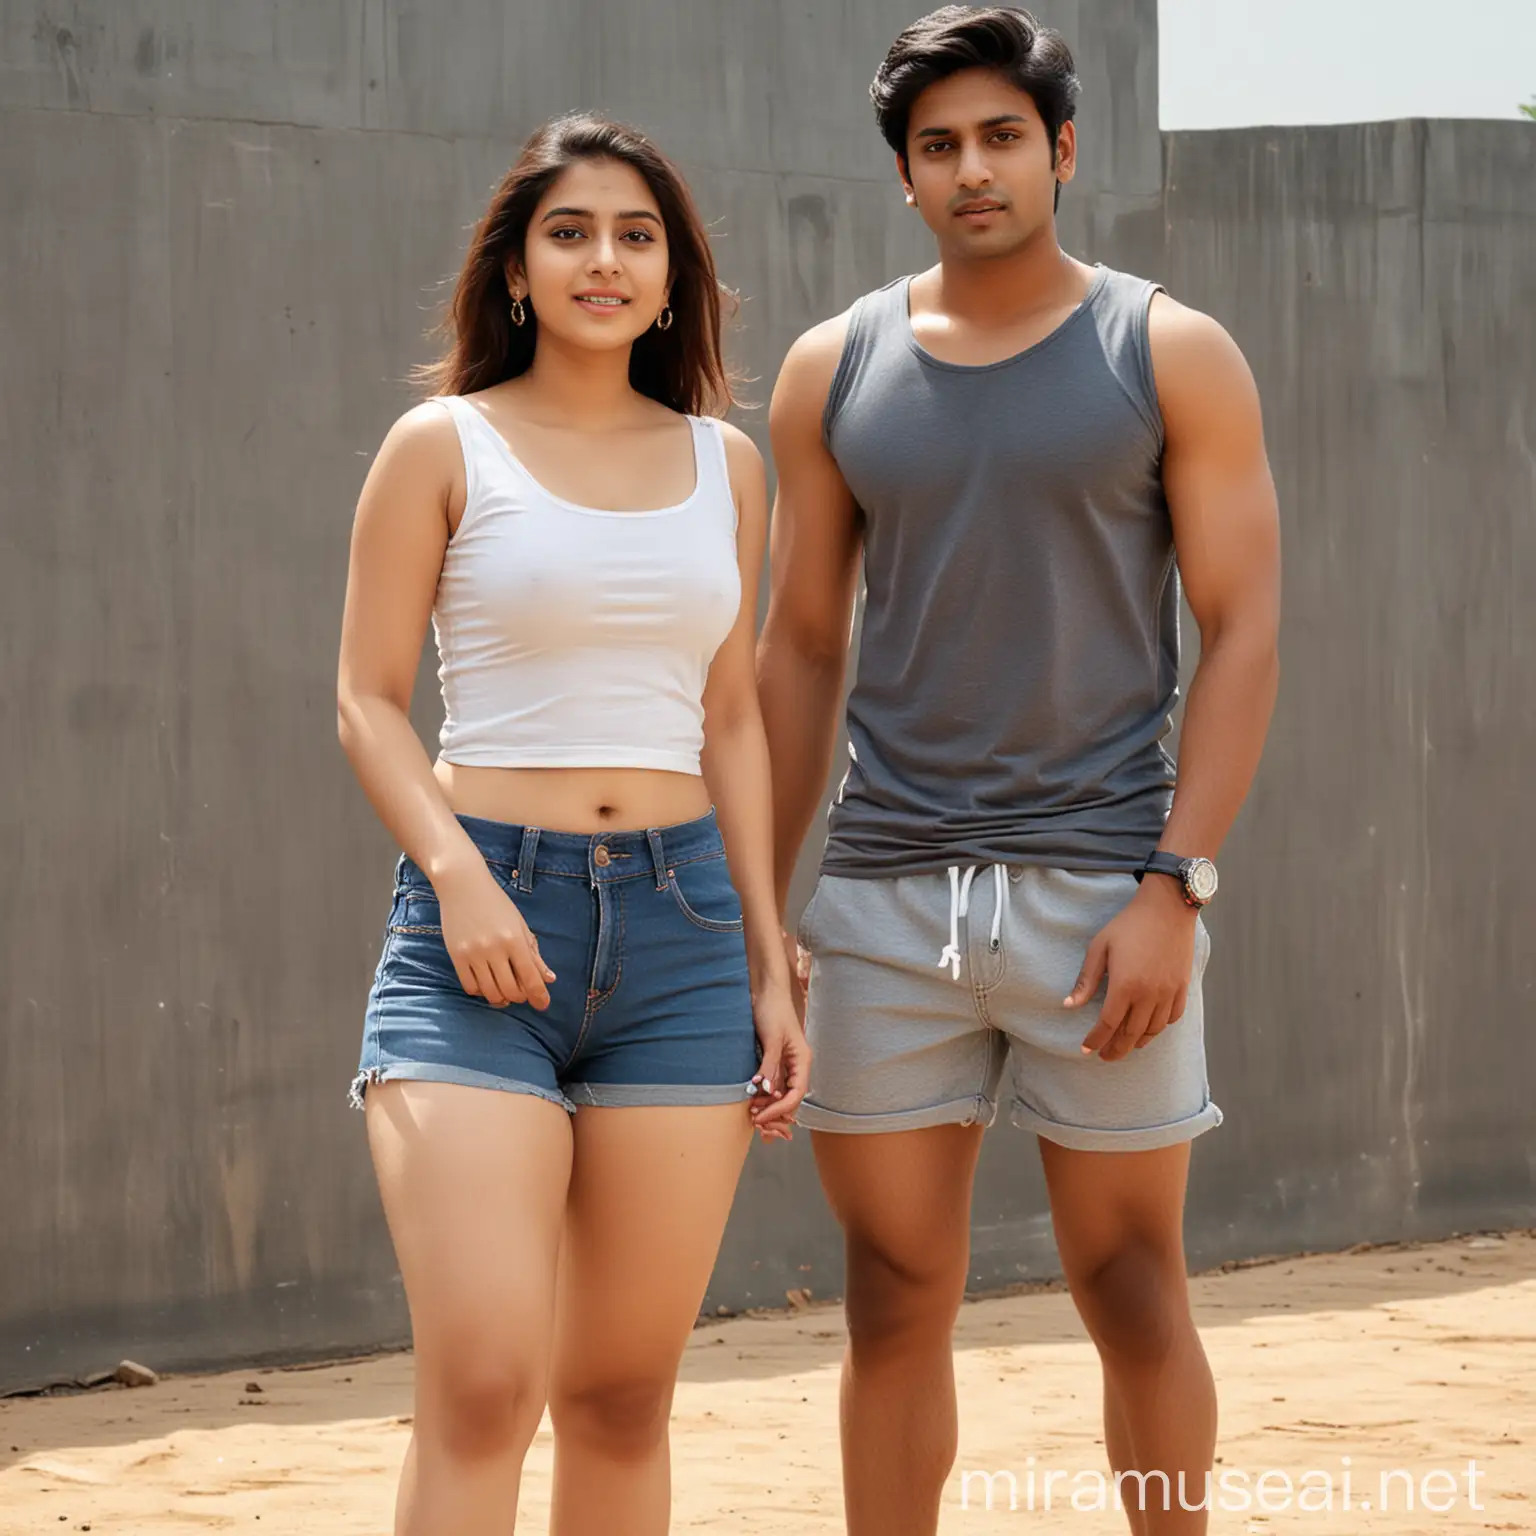 18 year old fair skinned white busty indian girl actress seductress in sleeve-less t-shirt and shorts showing thick thighs with her boy friend